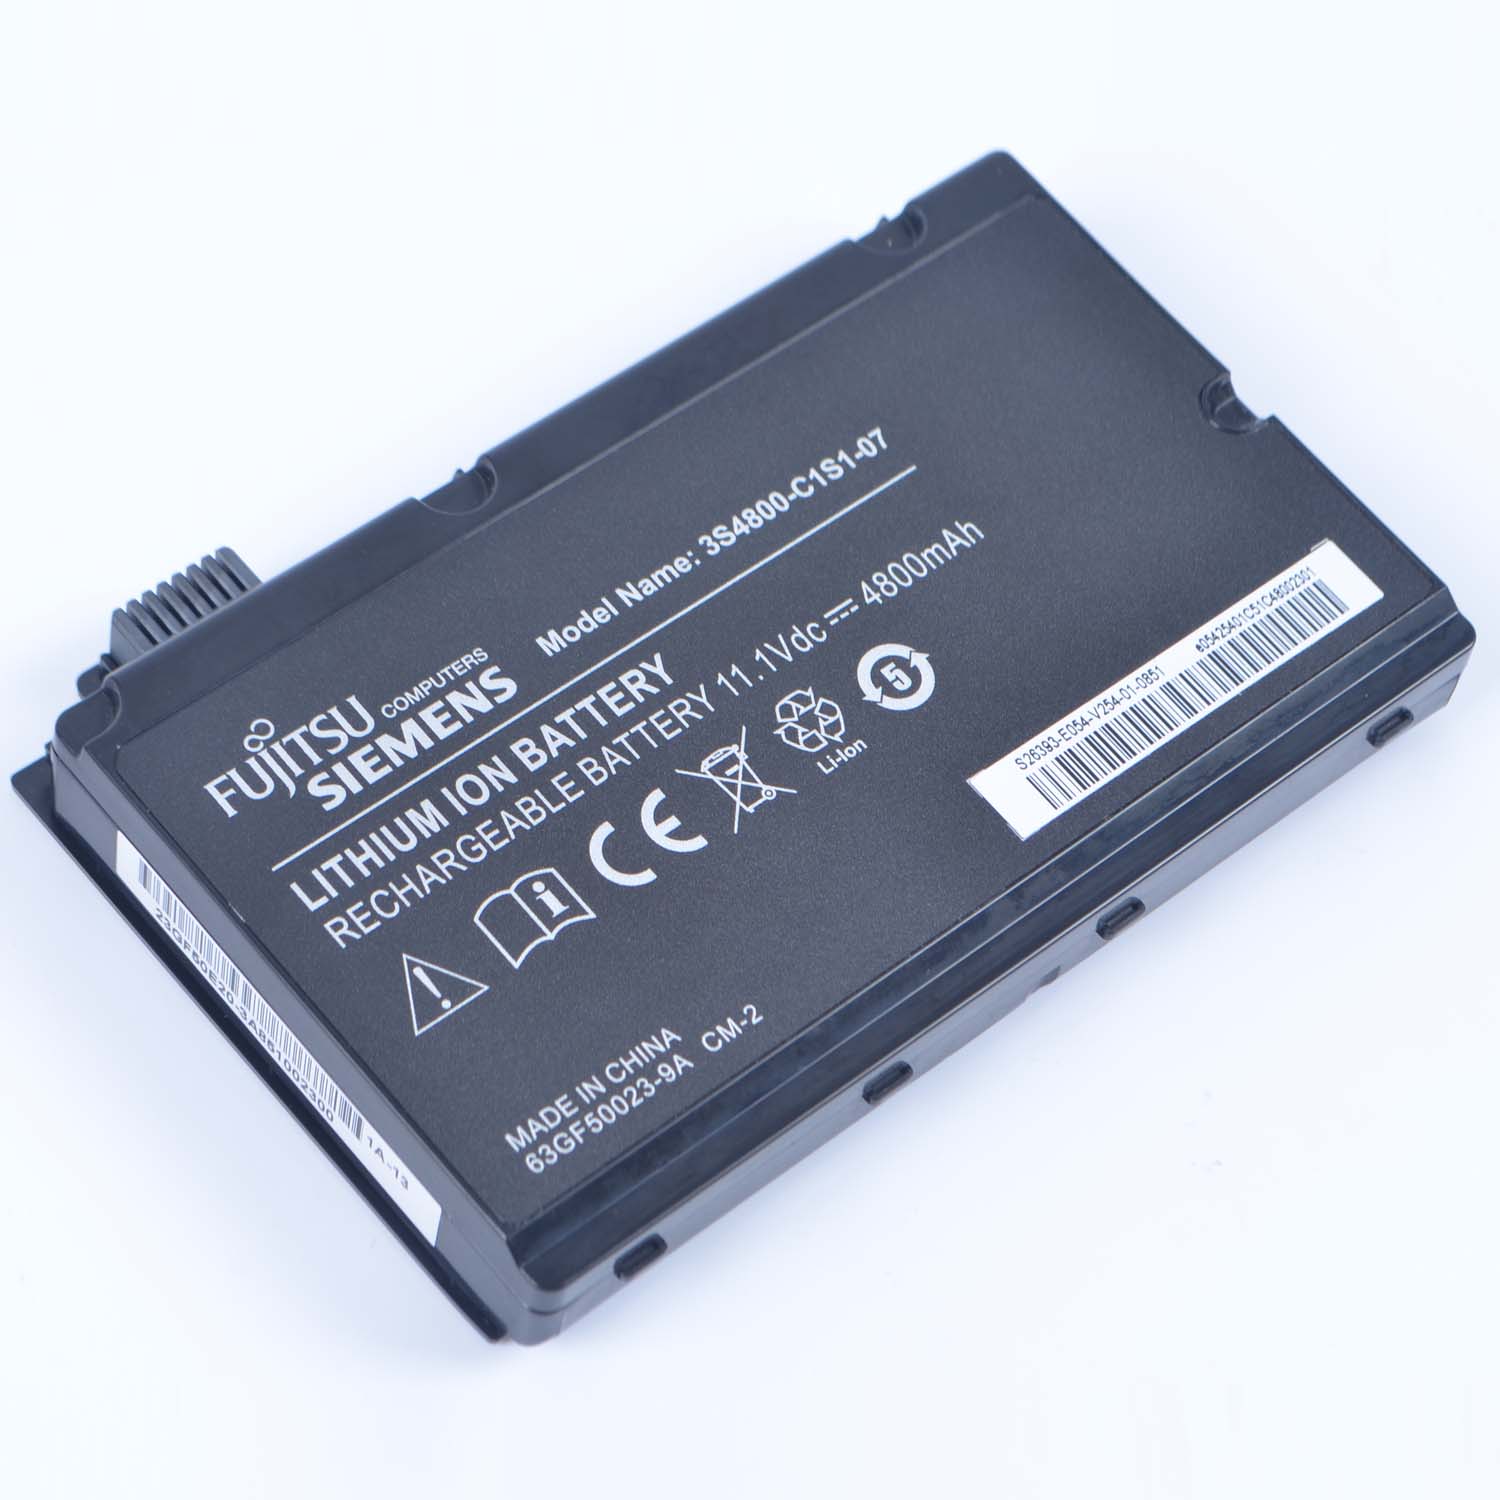 Replacement Battery for FUJITSU S26393-E010-V214 battery